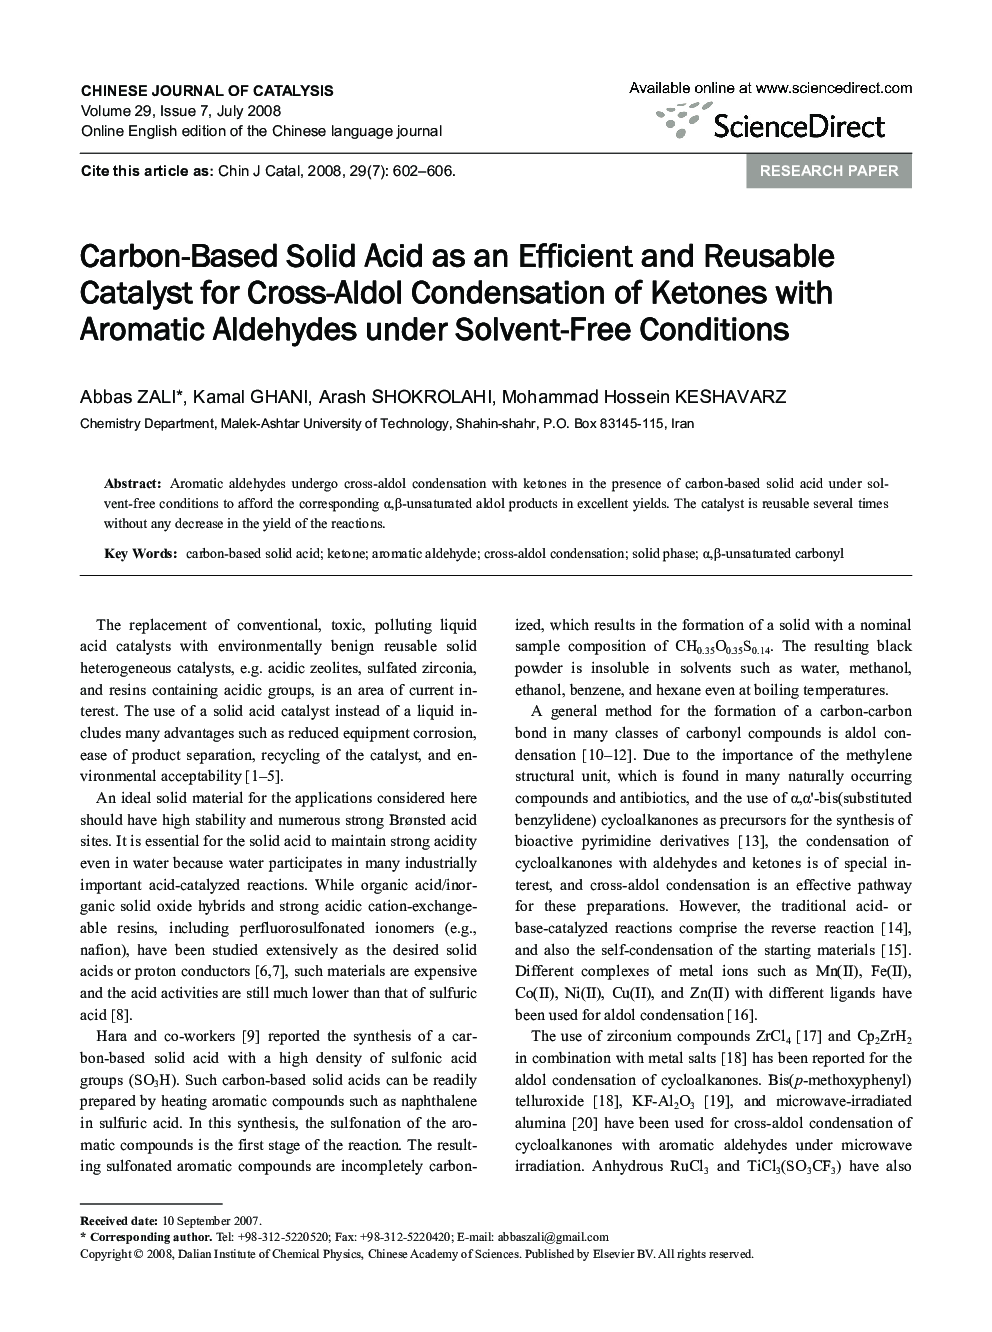 Carbon-Based Solid Acid as an Efficient and Reusable Catalyst for Cross-Aldol Condensation of Ketones with Aromatic Aldehydes under Solvent-Free Conditions